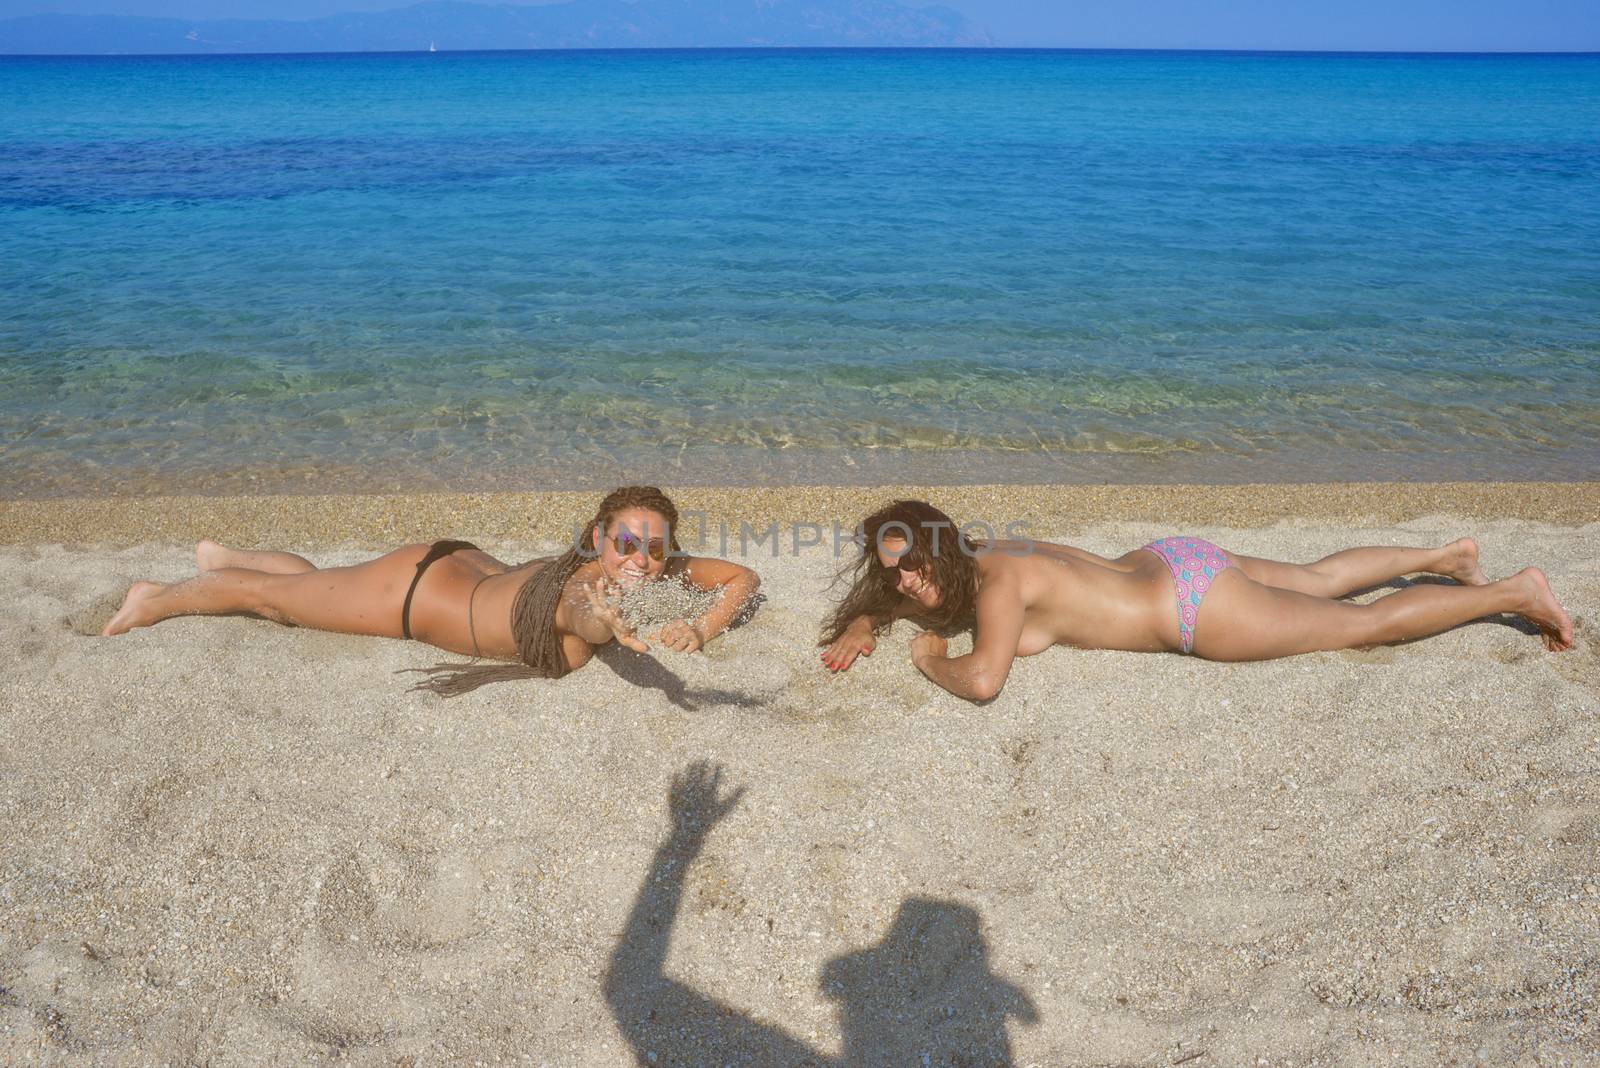 Two beautiful women on the beach are smiling to a person, shown with his waving shadow on the sand.